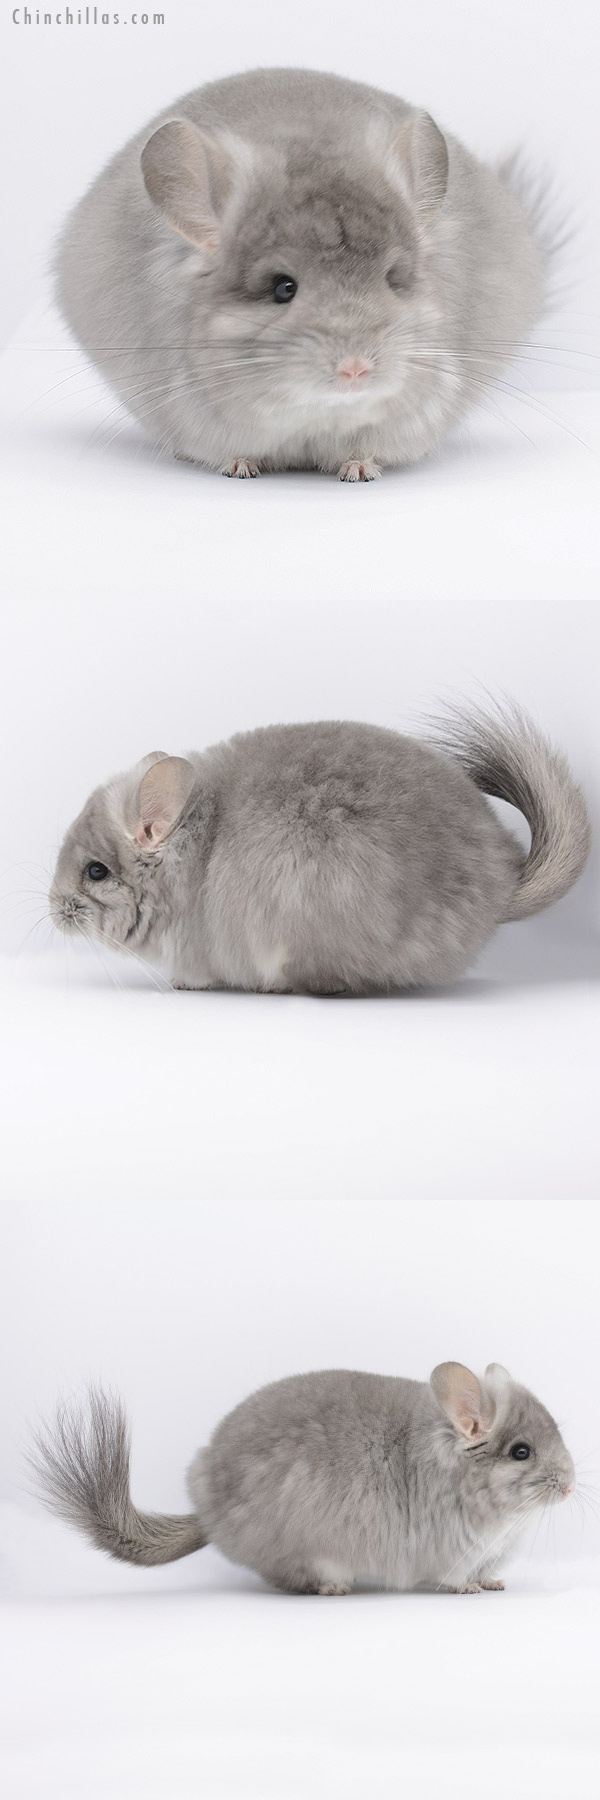 Chinchilla or related item offered for sale or export on Chinchillas.com - 20264 Rare Violet Fading White  Royal Persian Angora Female Chinchilla